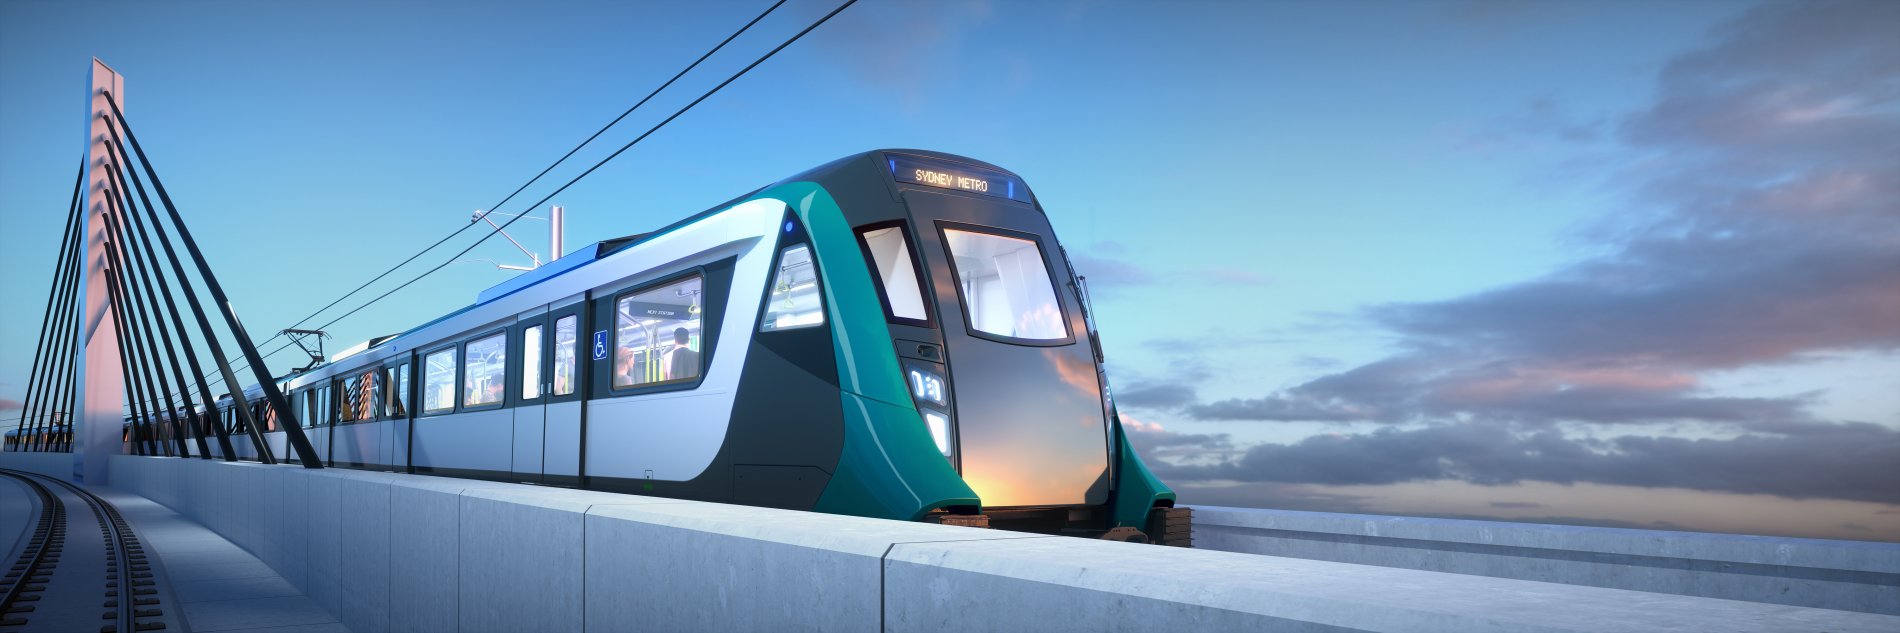 TorchMedia Wins Advertising Rights For Sydney Metro North ...